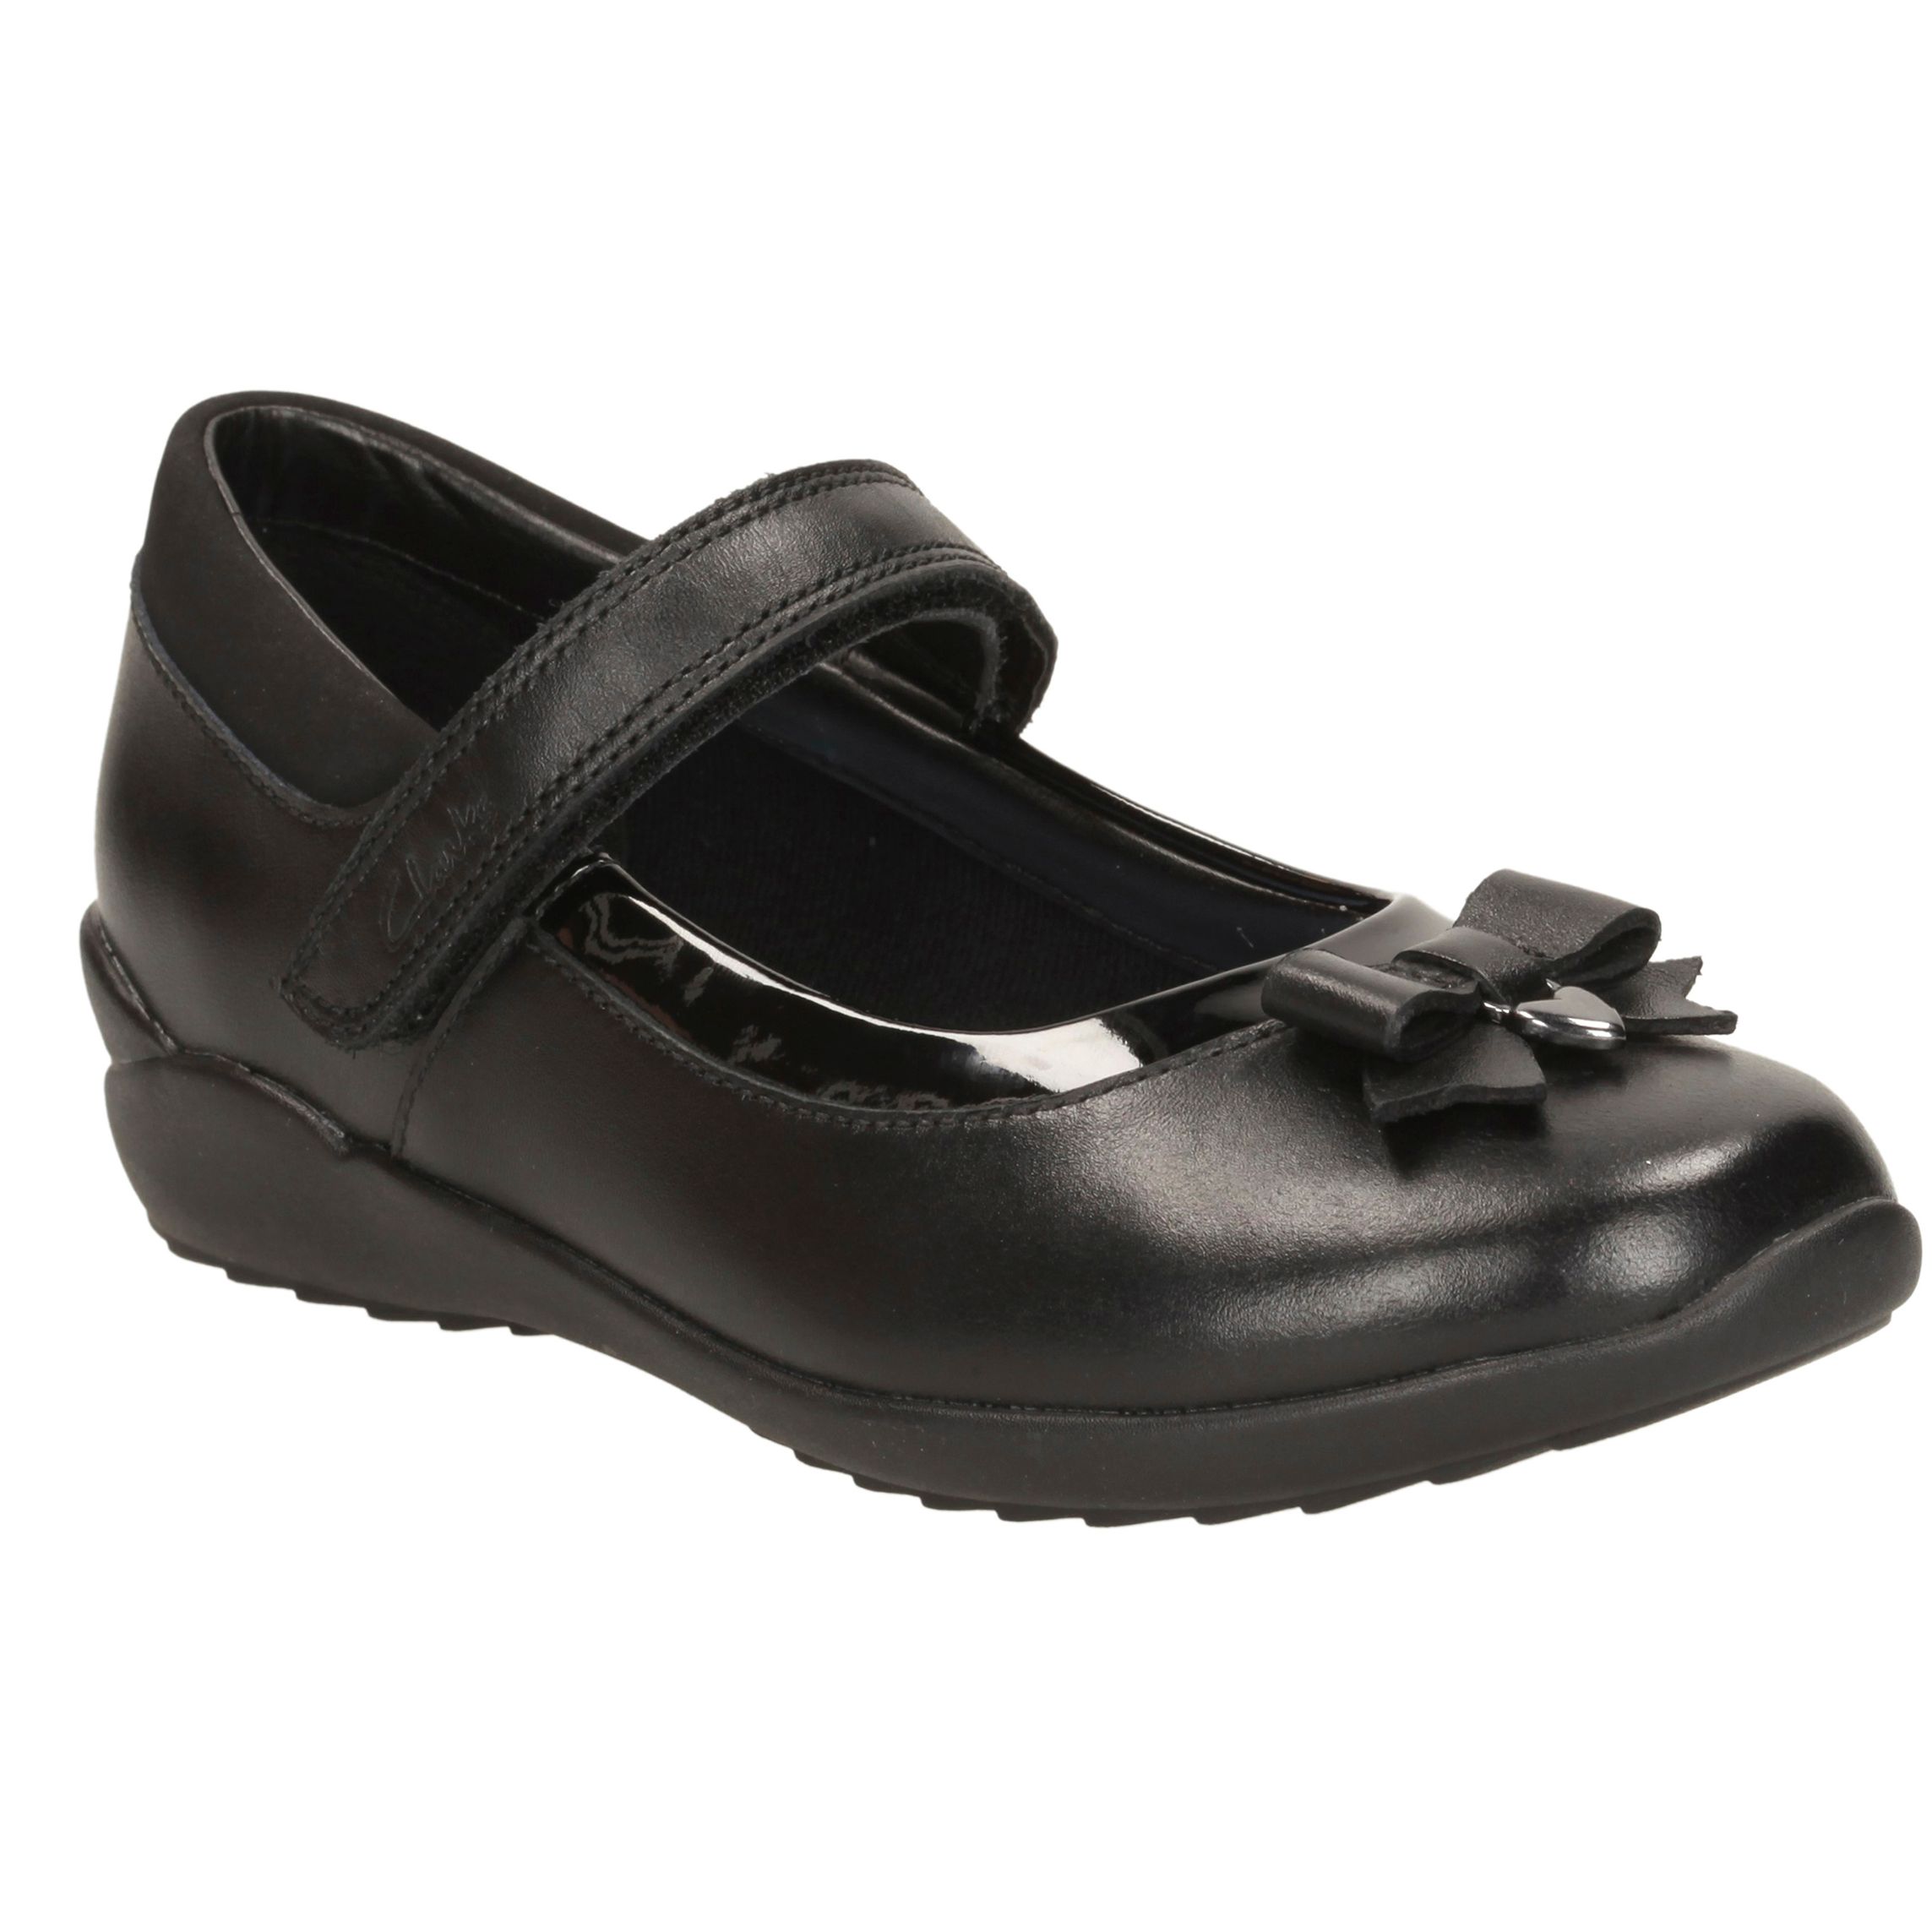 clarks toddler school shoes